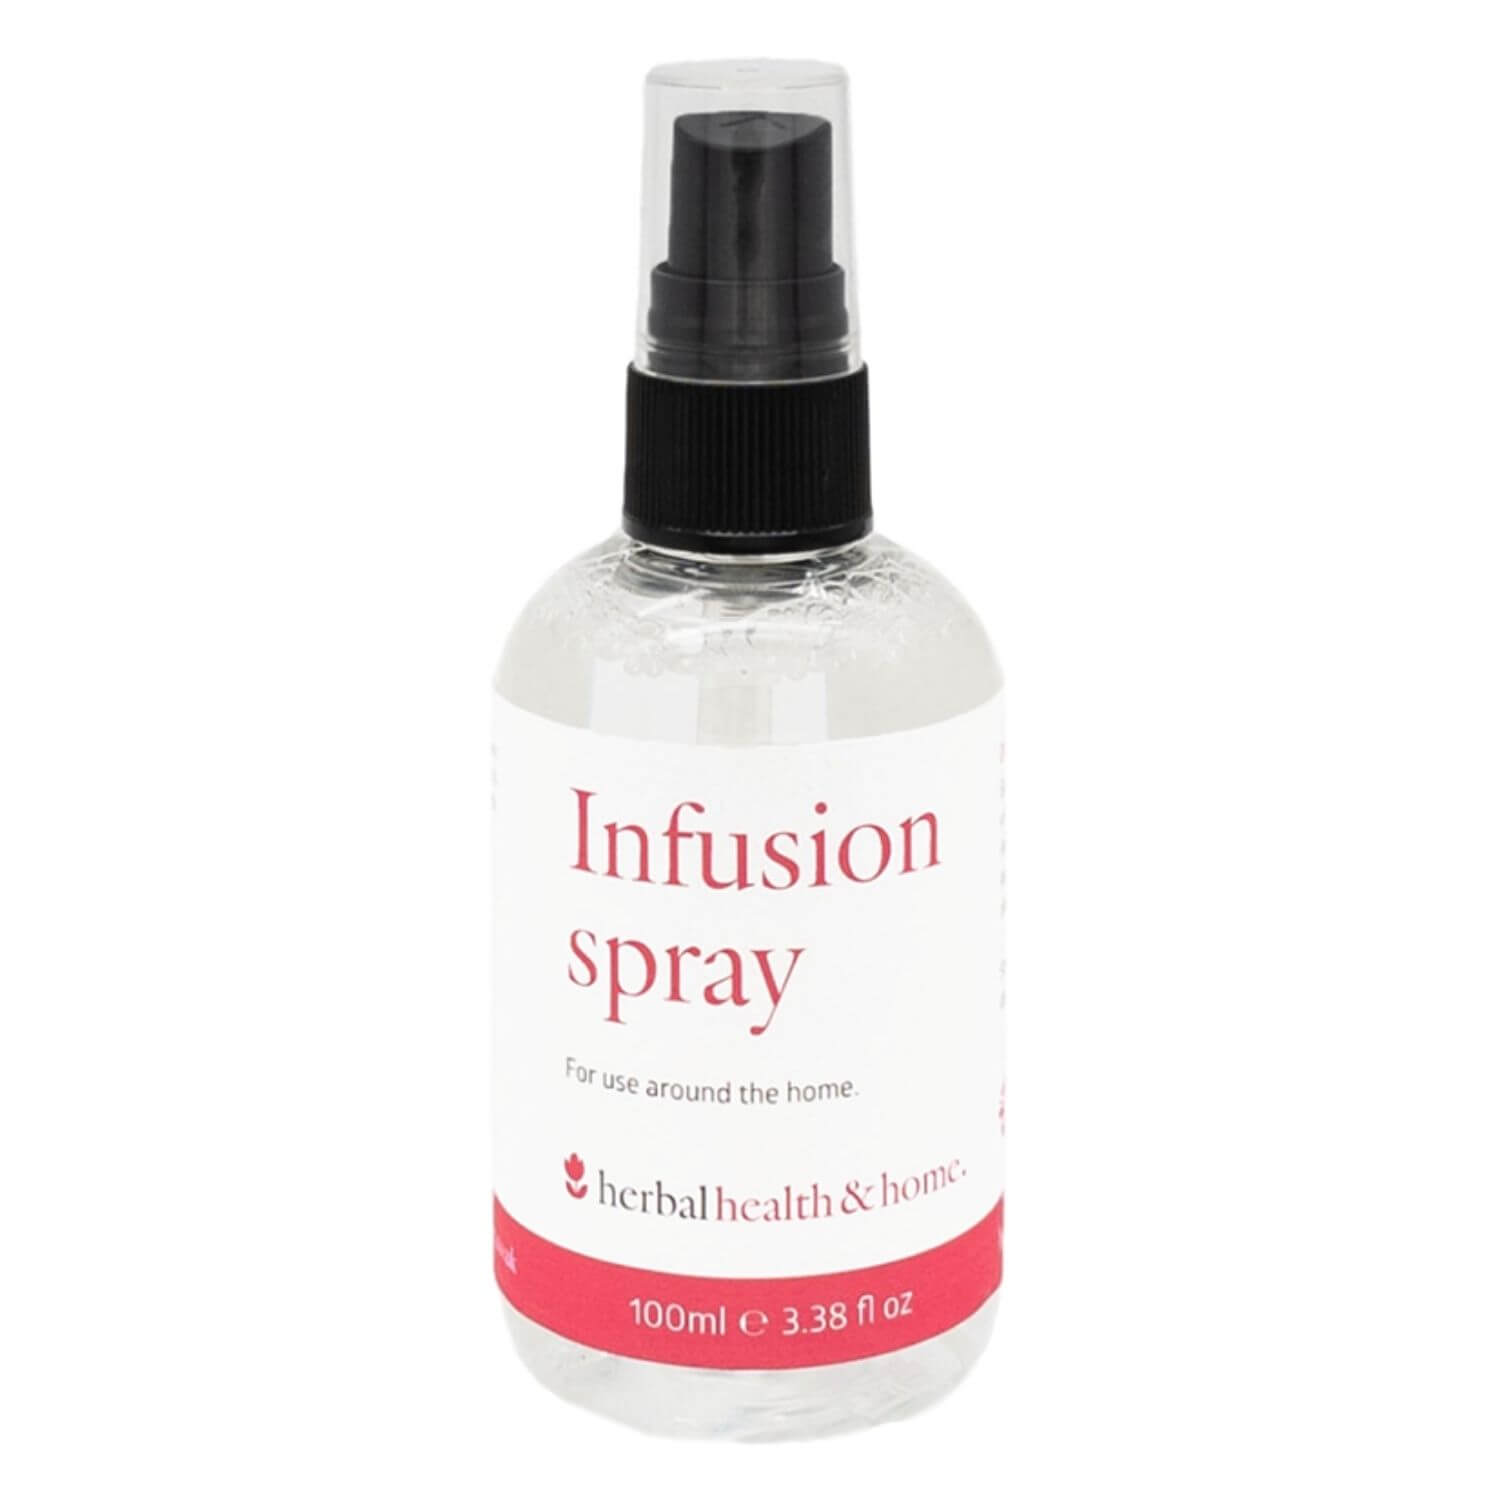 Infusion Spray | Herbal, Health & Home